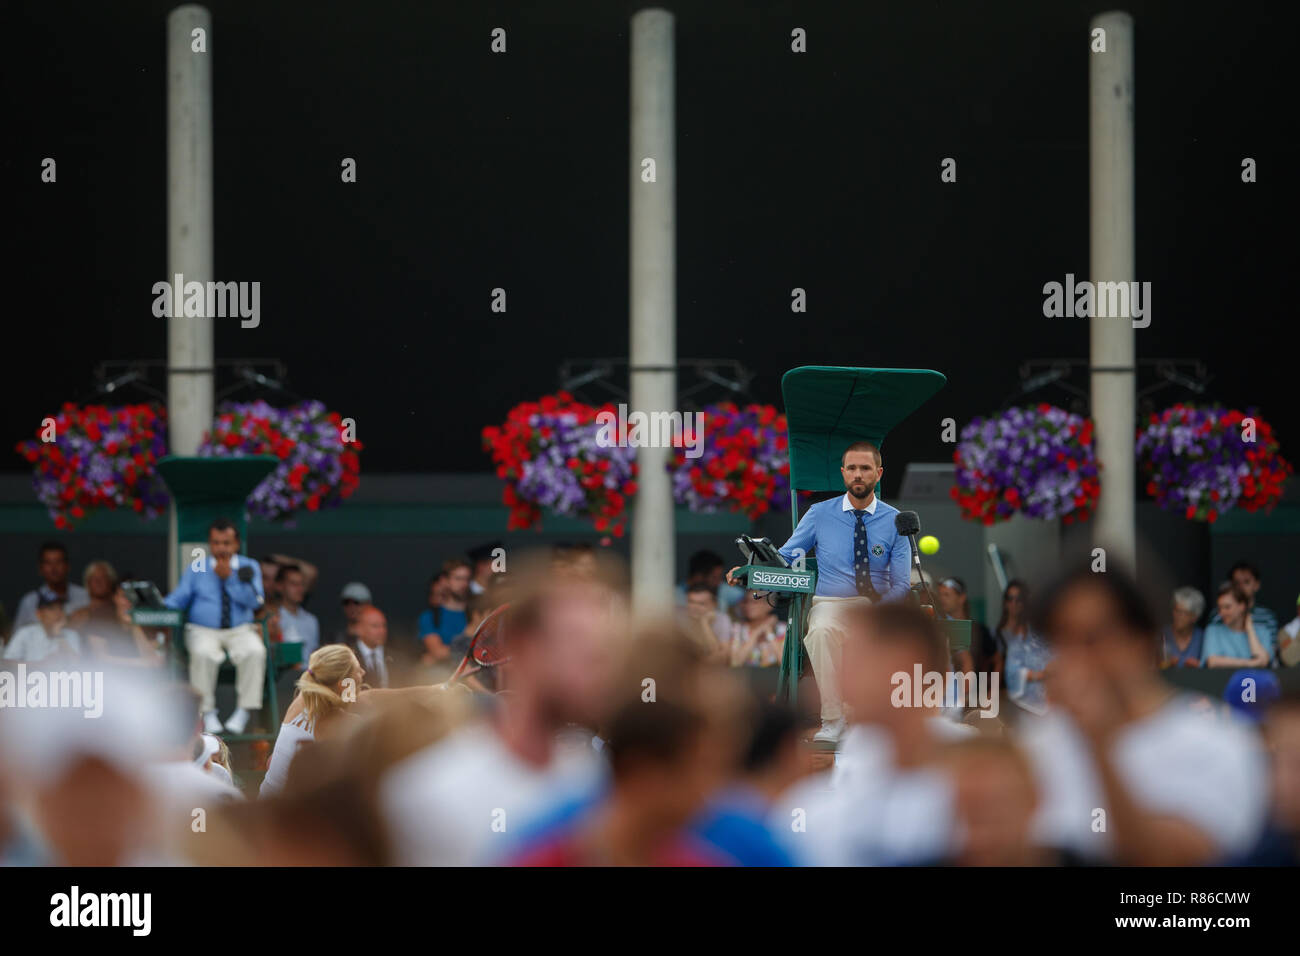 Color image of Umpires on court during the Wimbledon Championships 2018 Stock Photo